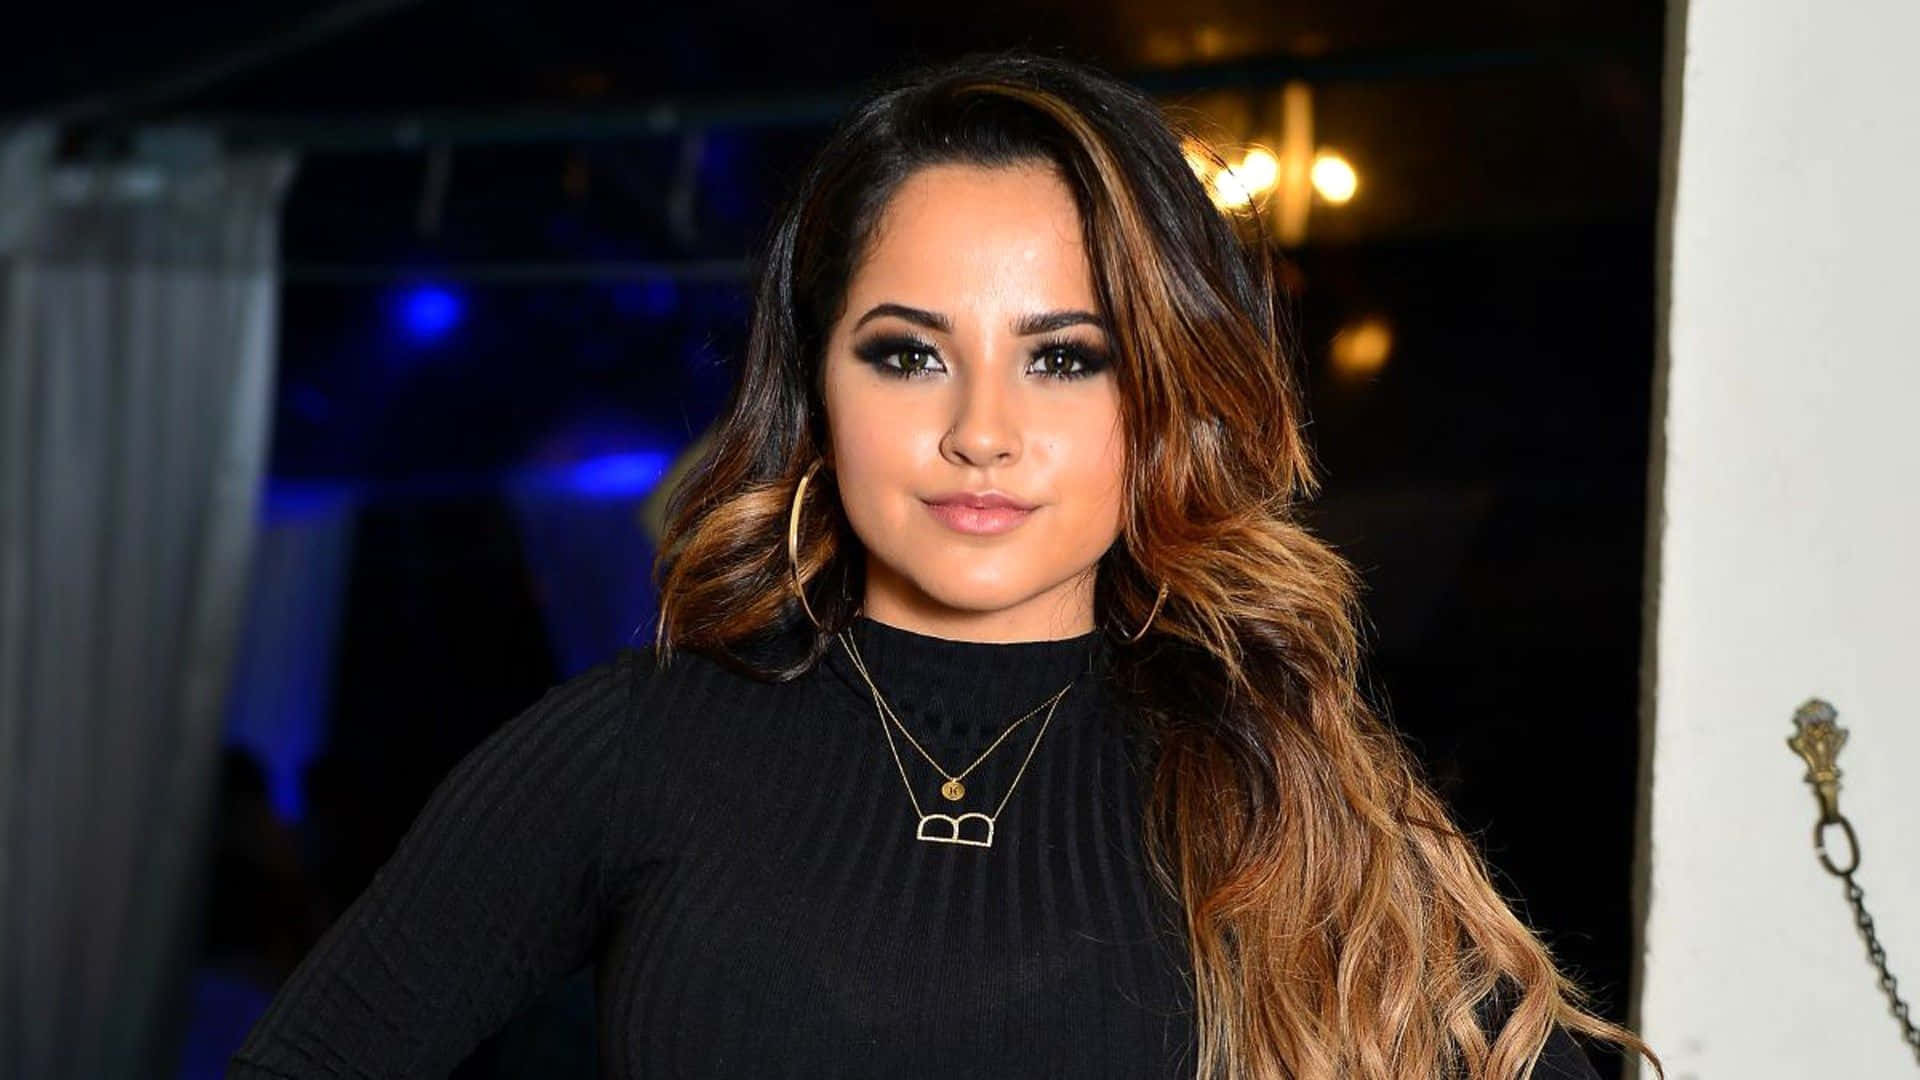 Singer and songwriter Becky G performing onstage